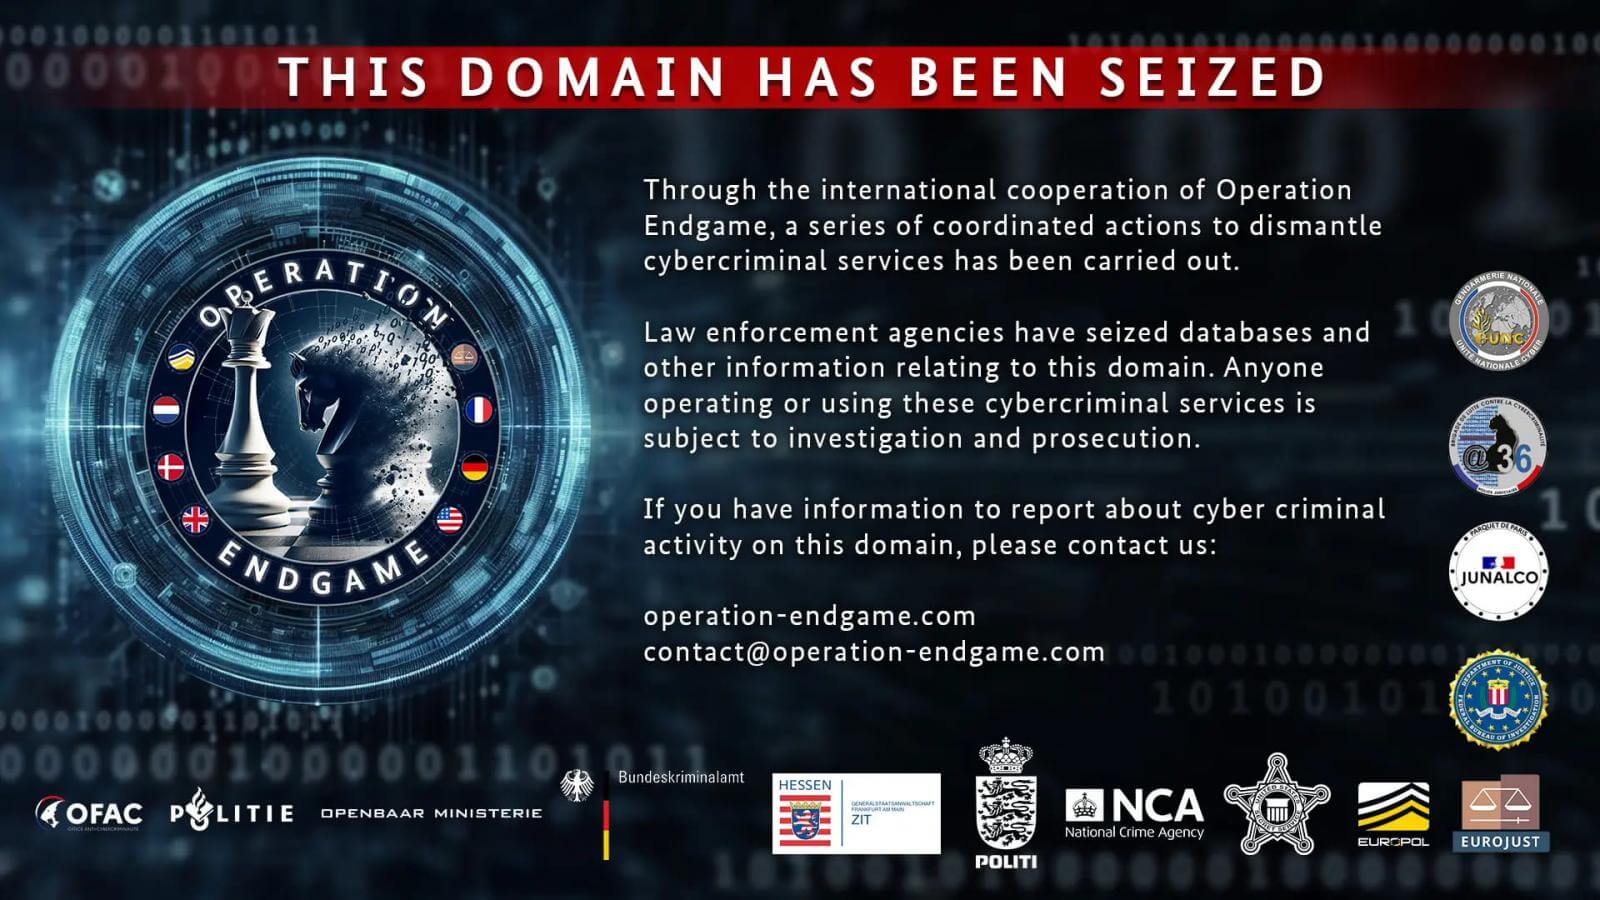 Banner stating 'THIS DOMAIN HAS BEEN SEIZED' with a graphic of chess pieces and digital code in the background. The text explains that through the international cooperation of Operation Endgame, coordinated actions to dismantle cybercriminal services have been carried out. 